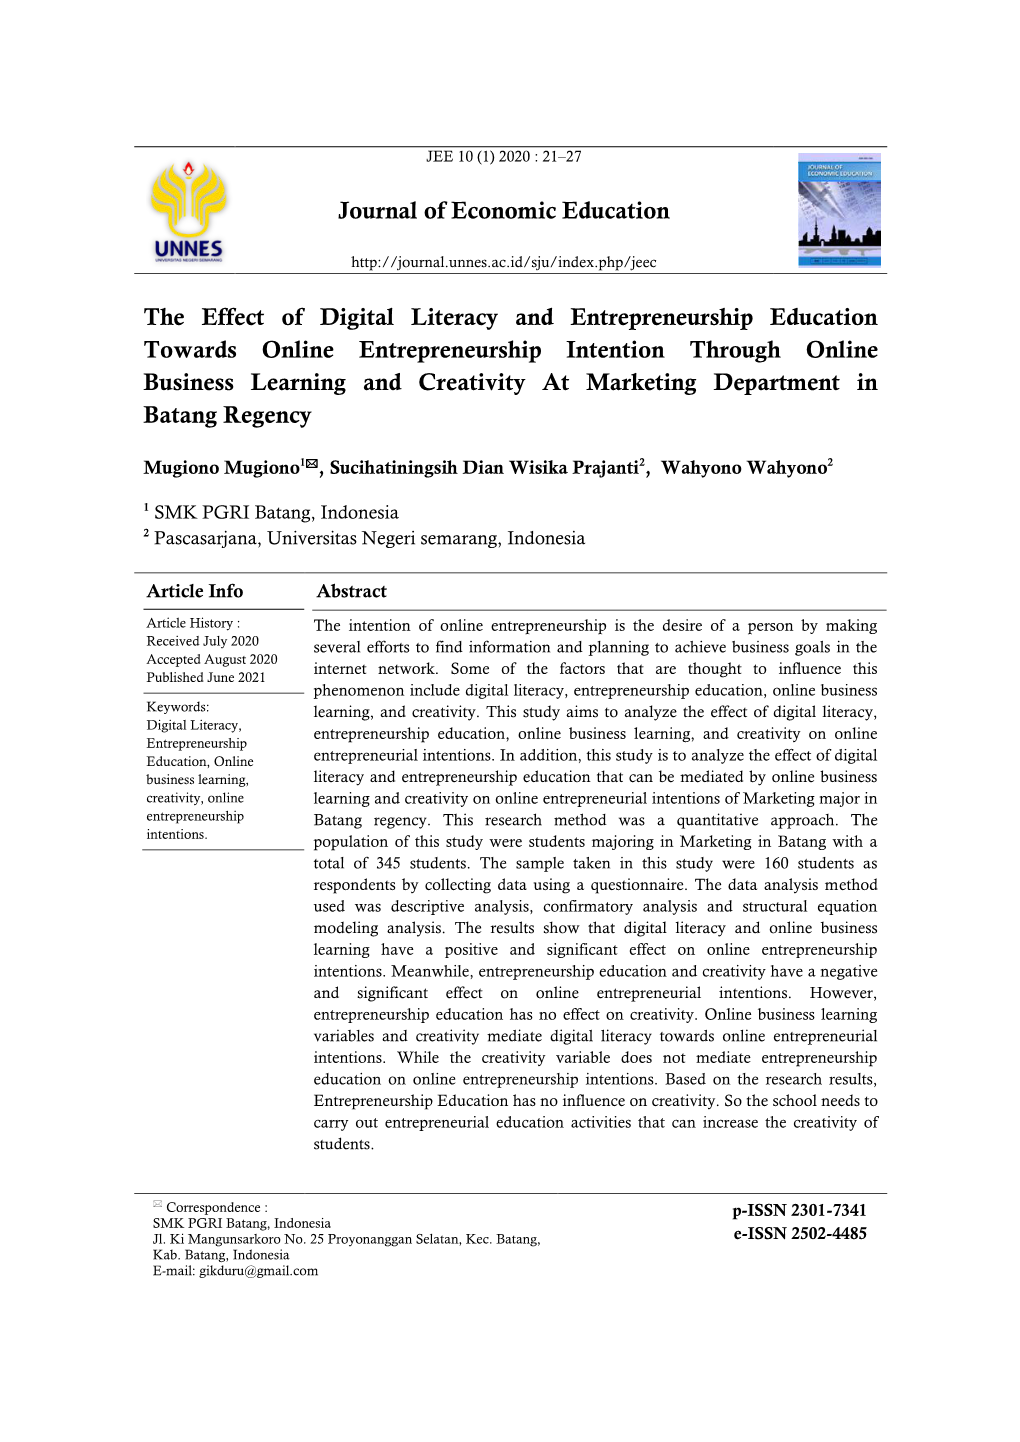 Journal of Economic Education the Effect of Digital Literacy And